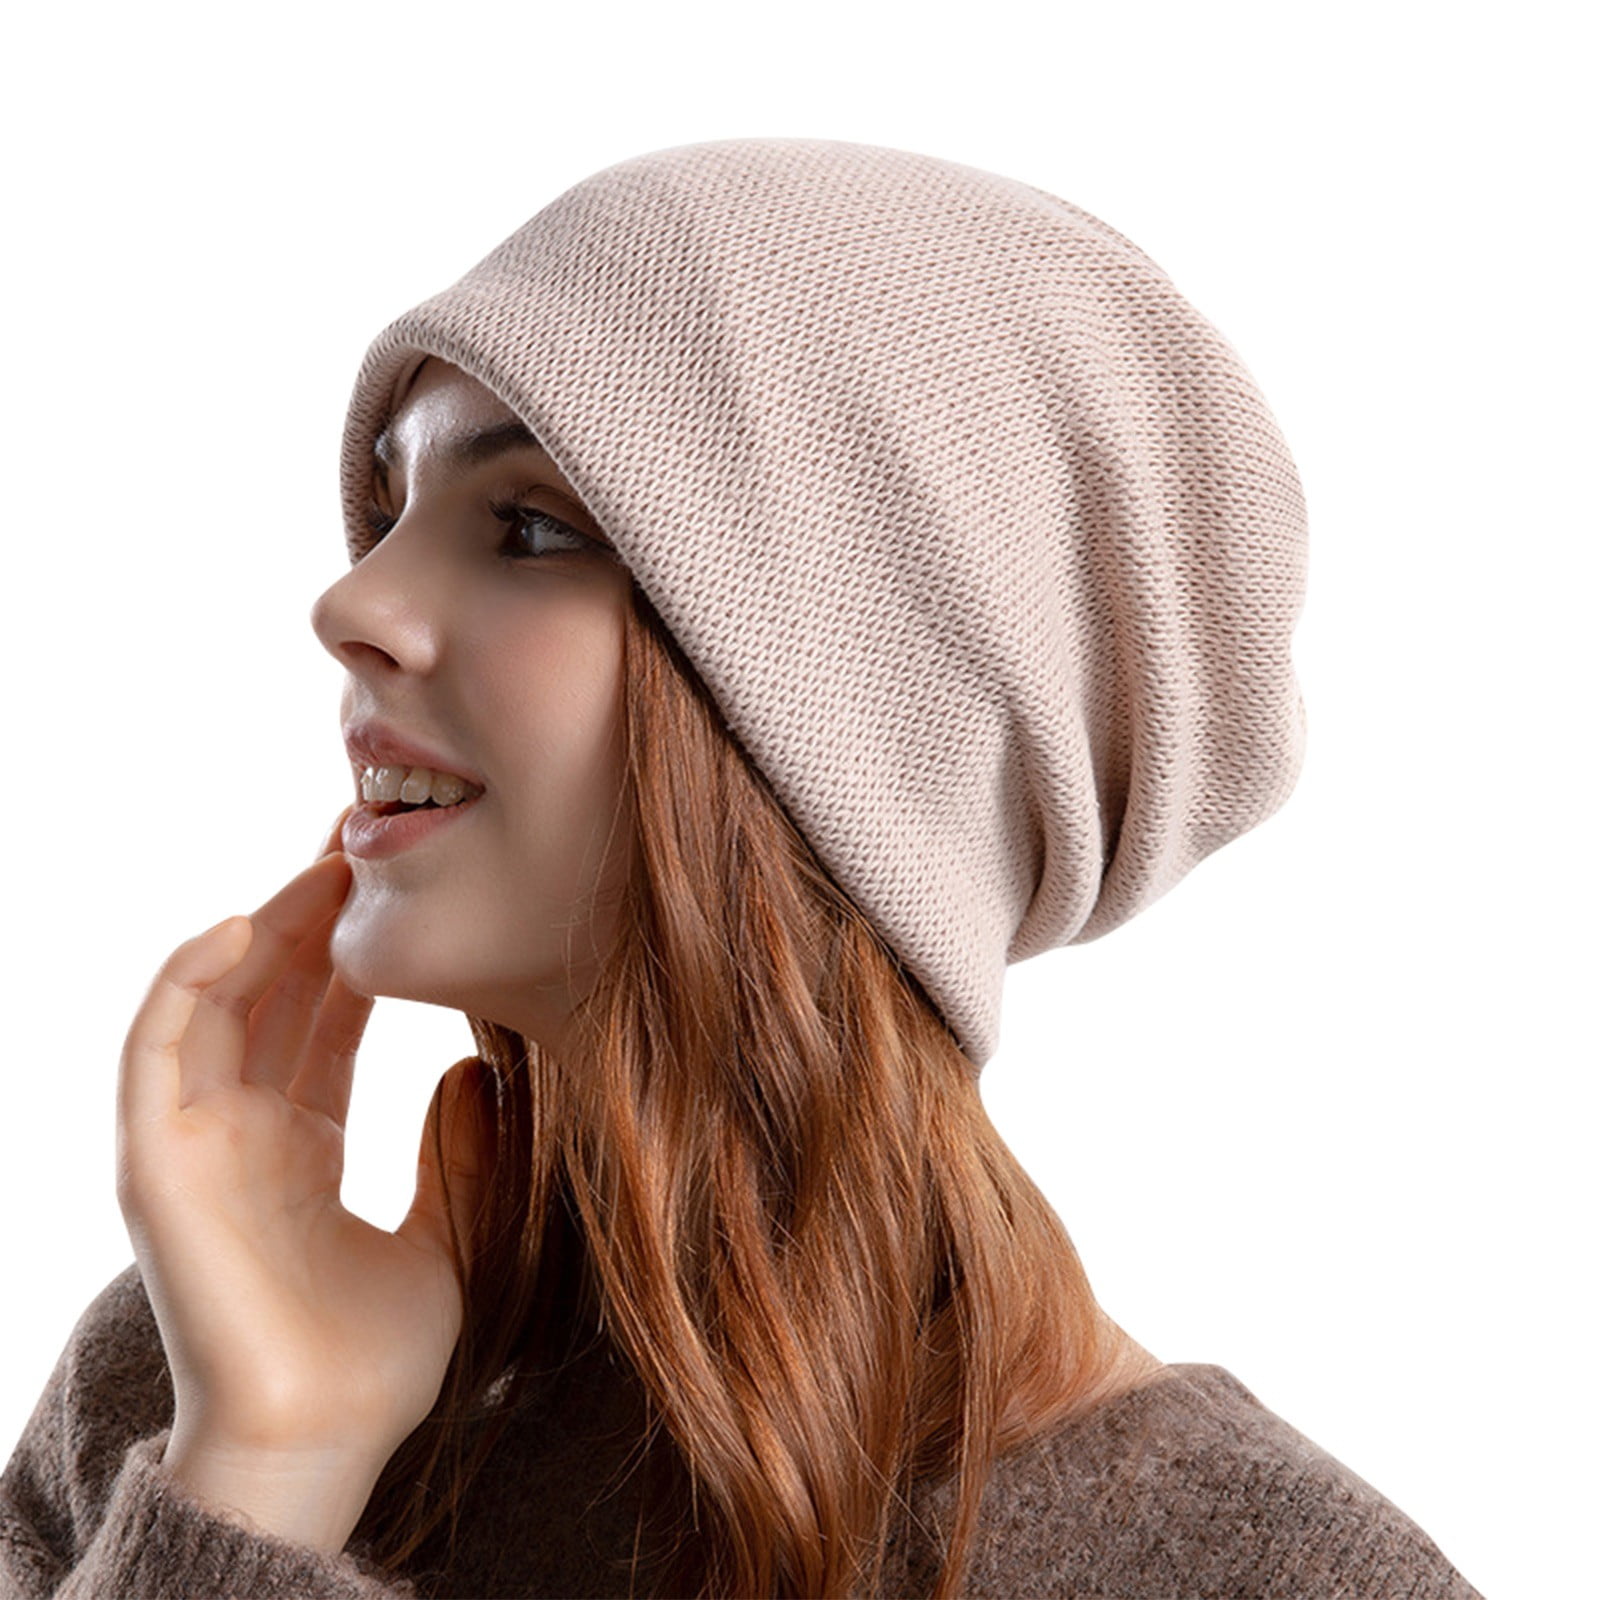 ZXHACSJ Fashion Womens Thickened Knitted Woolen Cap Cold Protective Ear  Sleeve Cap Beige